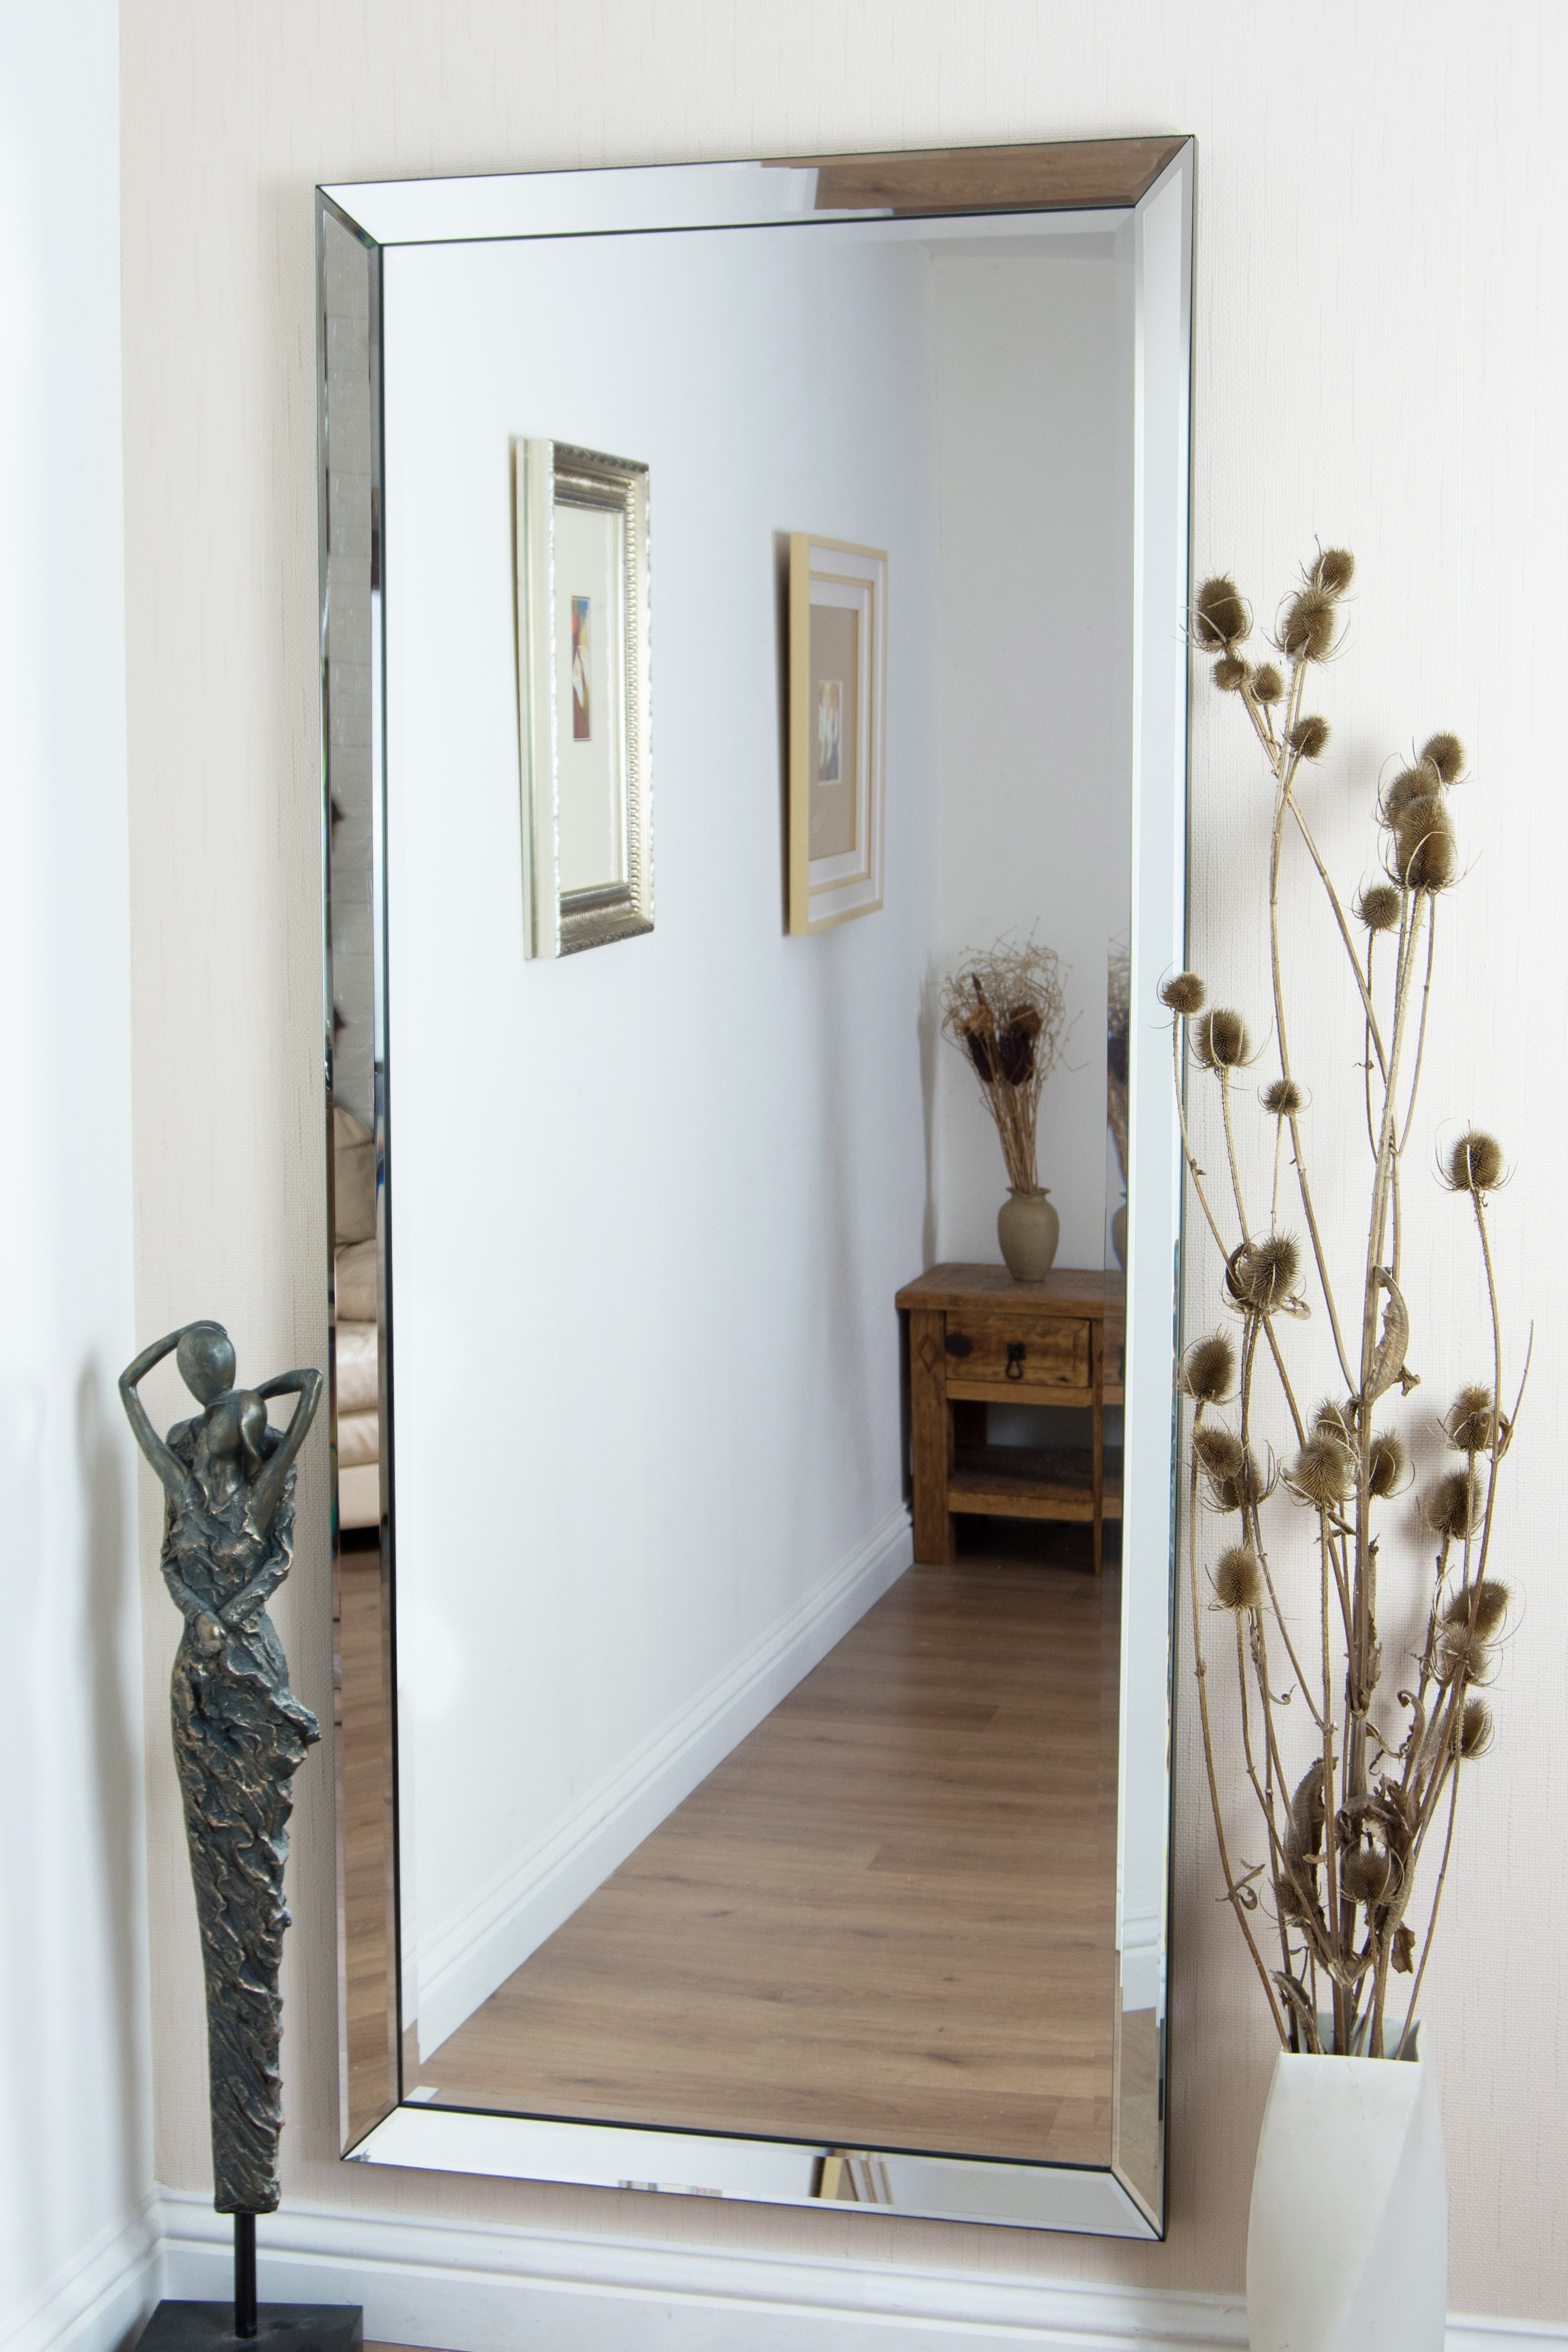 Unframed Wall Mirrors With Regard To Recent Decorating: Outstanding Frameless Full Length Mirror Warm (View 10 of 20)